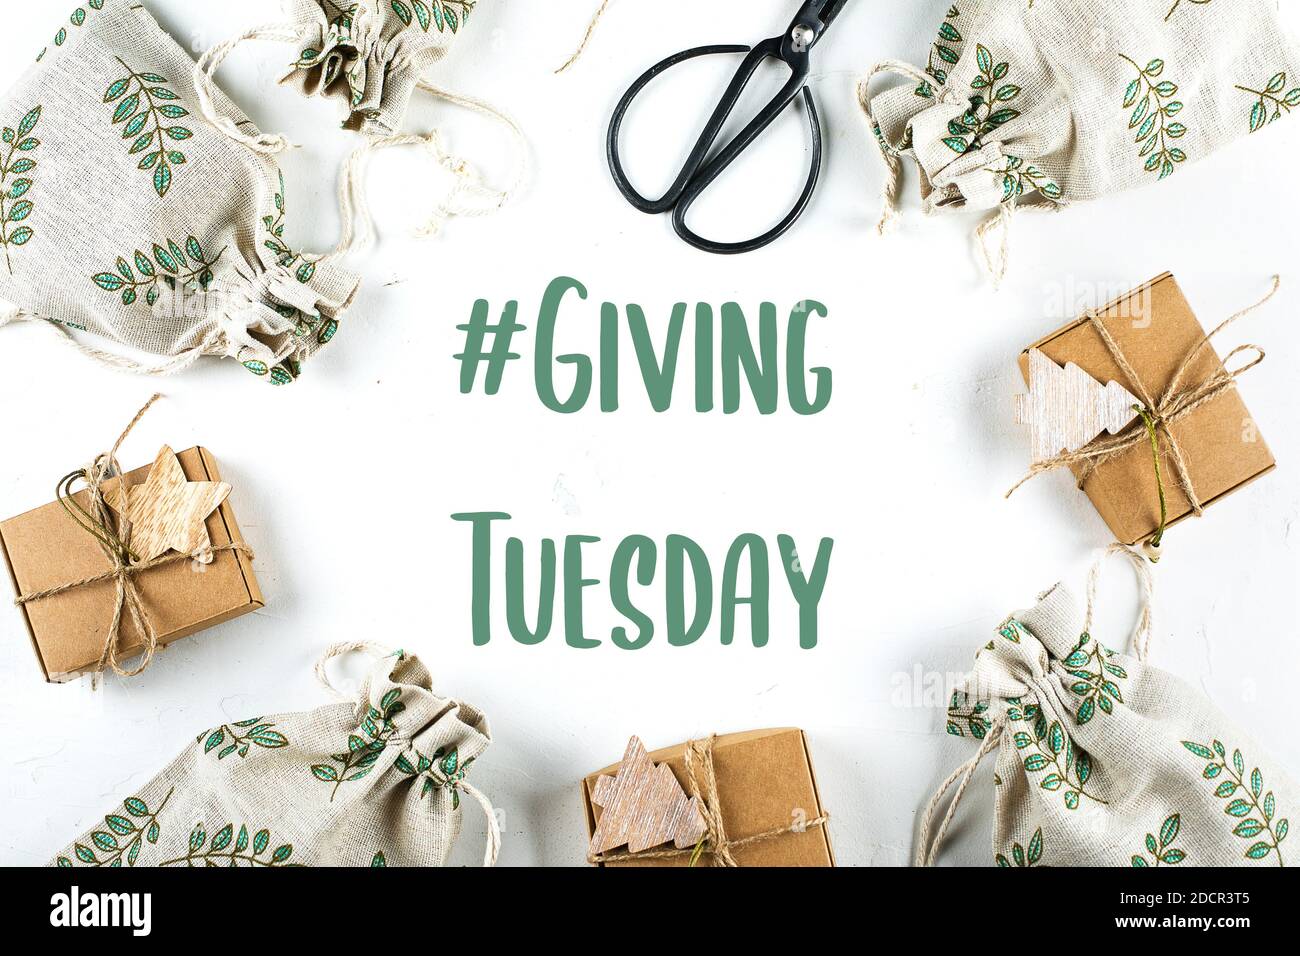 Giving Tuesday concept. Gift Wrapping Boxes. Zero Waste Gift Wrapping Holiday Season Eco-friendly Lifestyle. Top view, flat lay Stock Photo